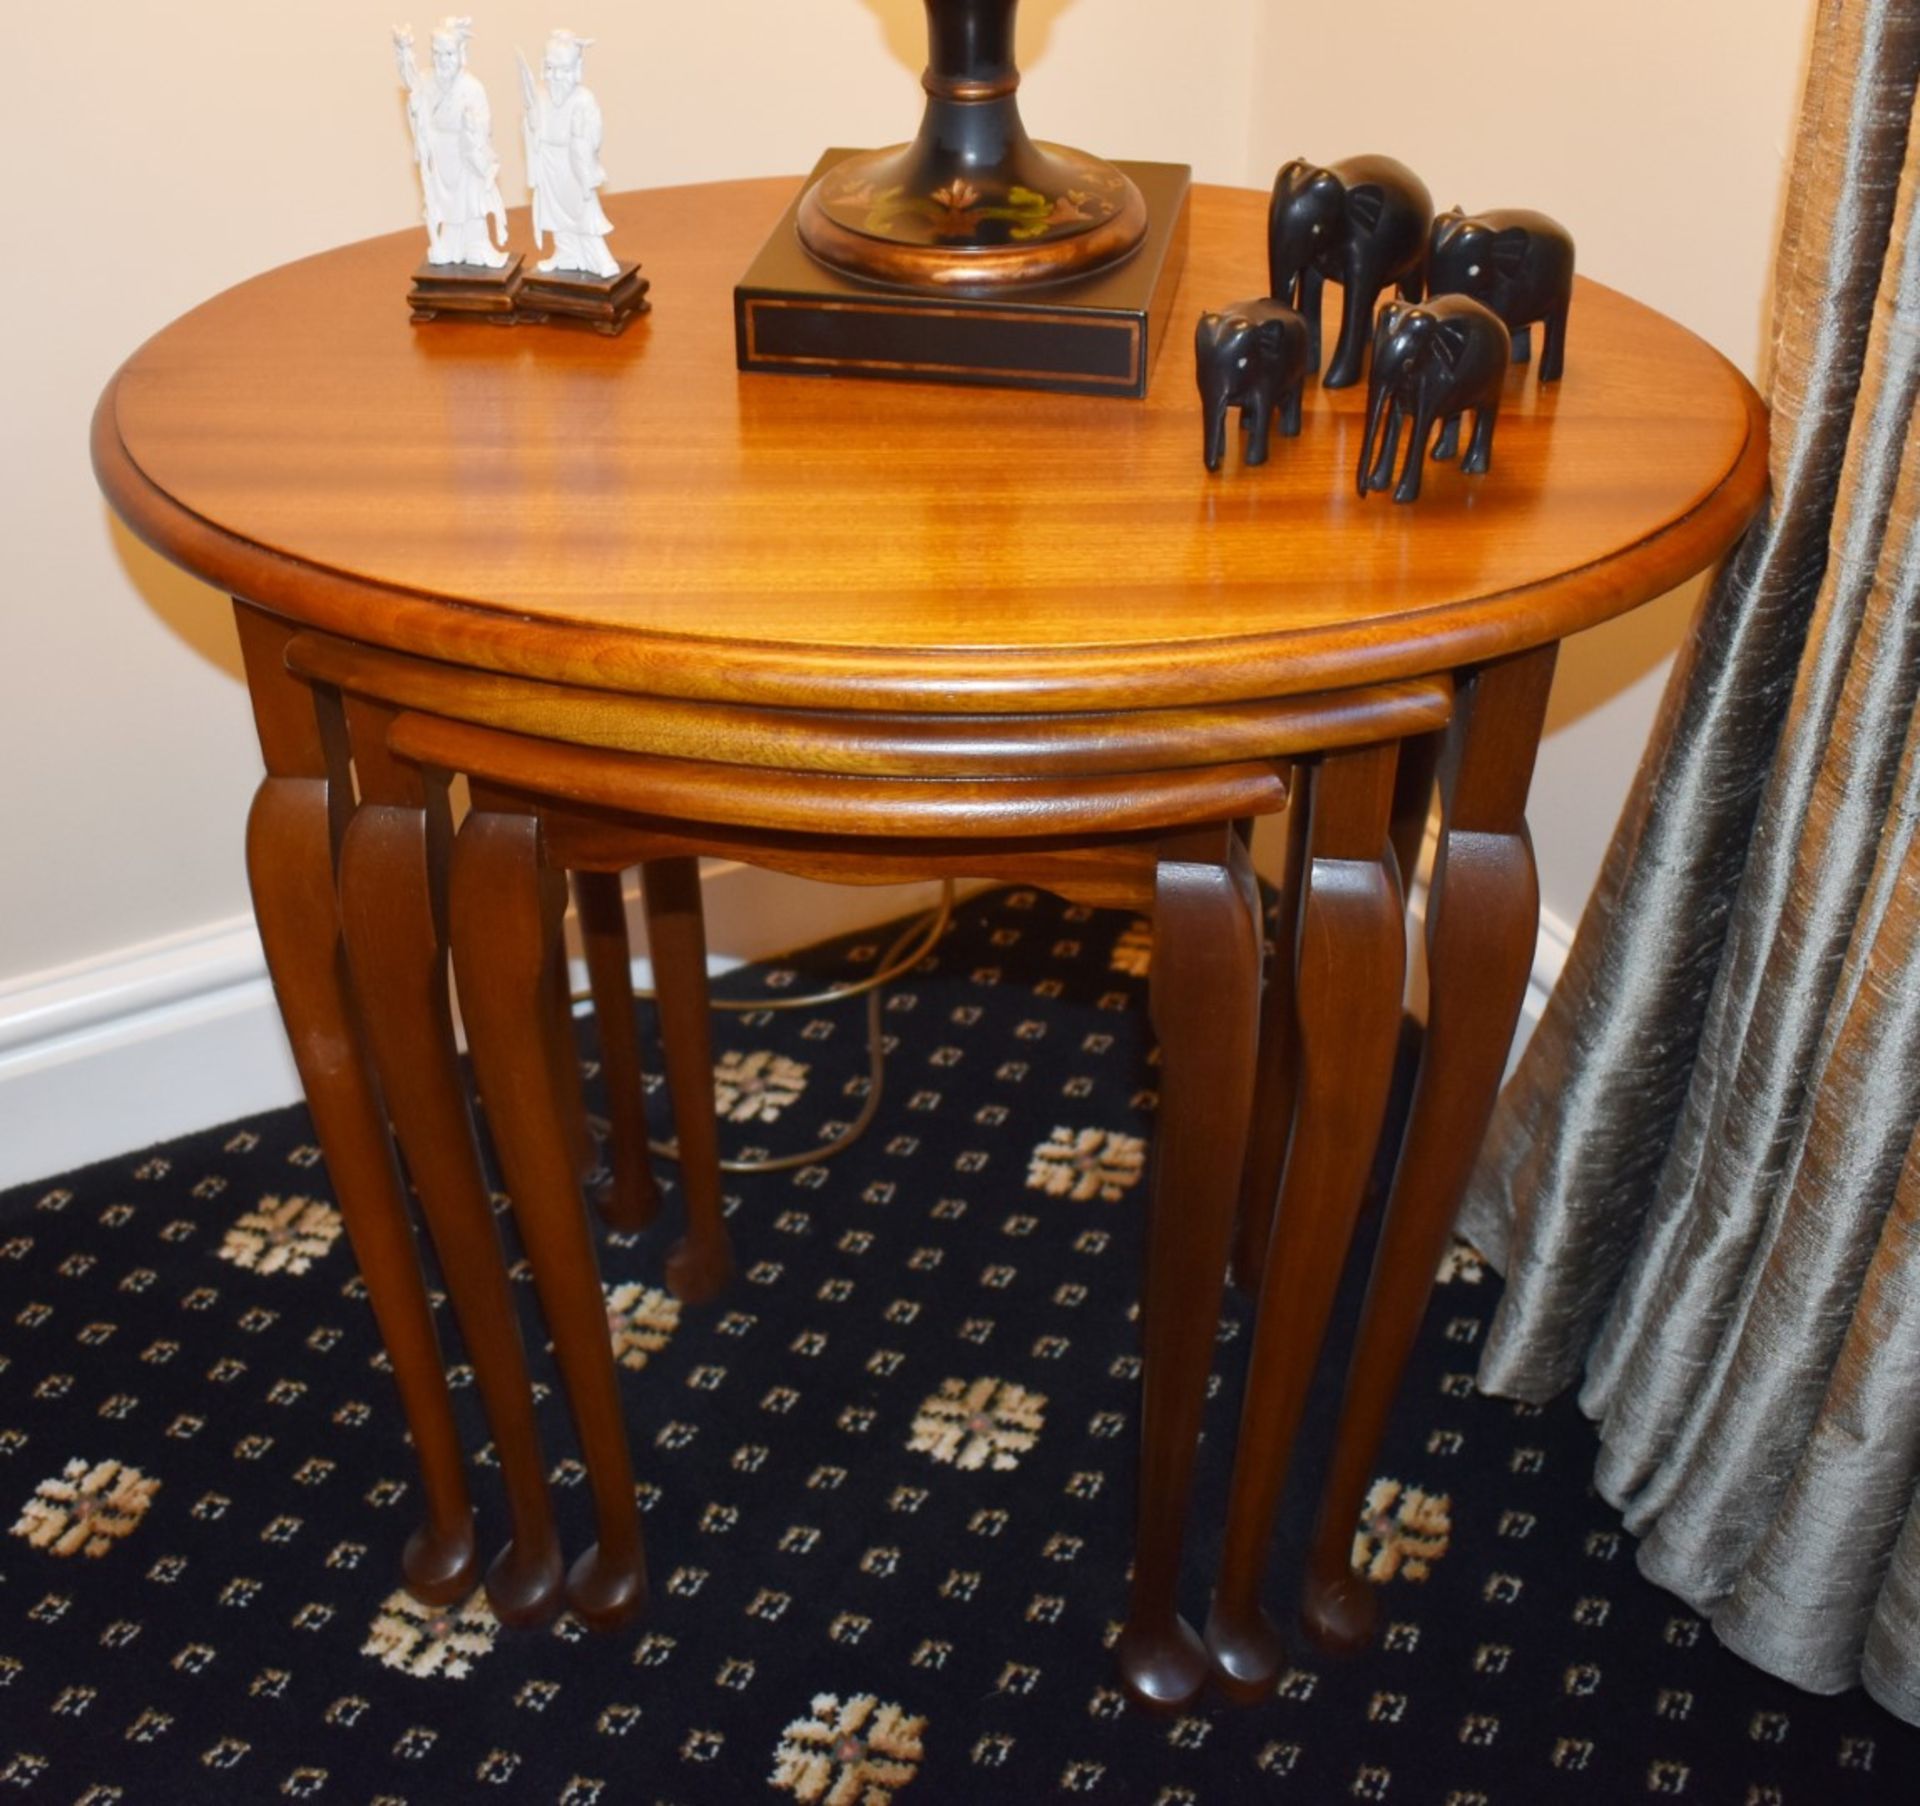 1 x Nest of Three Tables With Queen Anne Legs - Circa 1920's - Recently Restored in Stunning - Image 3 of 8